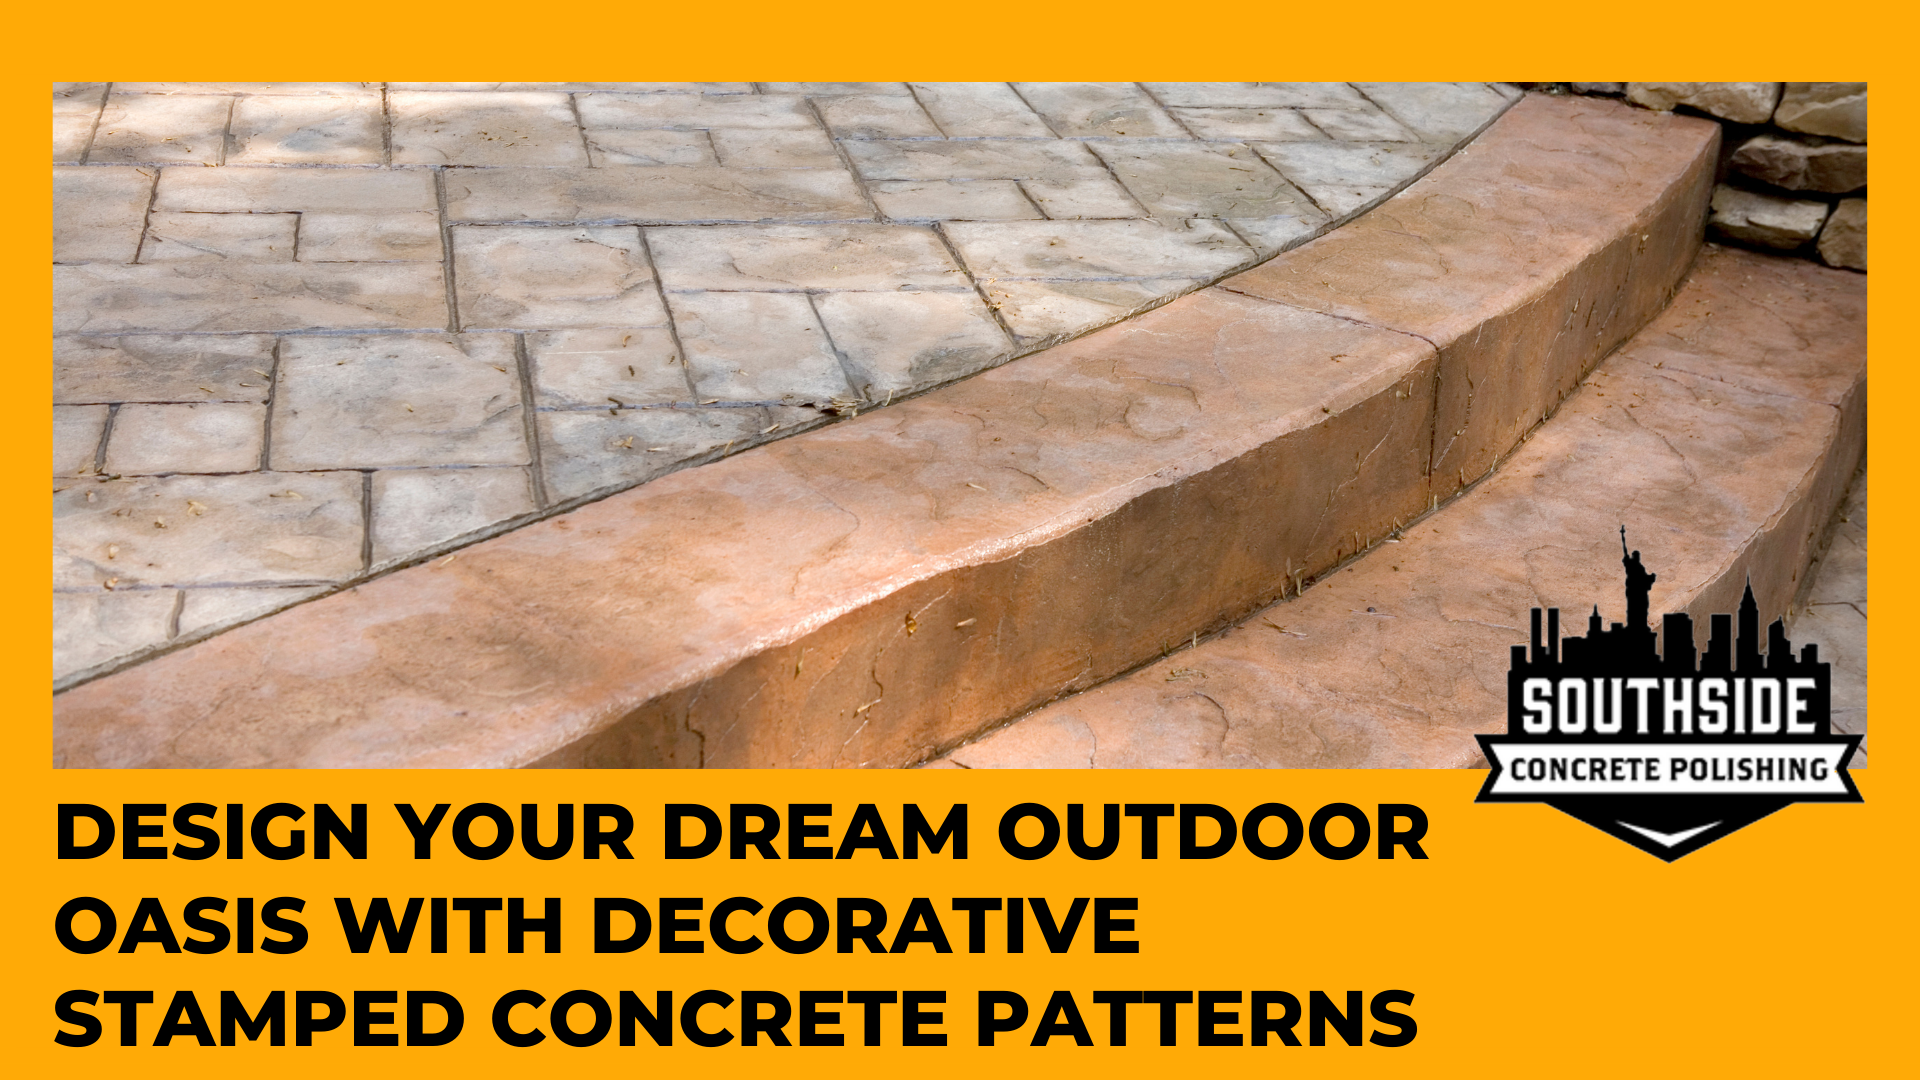 Design Your Dream Outdoor Oasis with Decorative Stamped Concrete 2